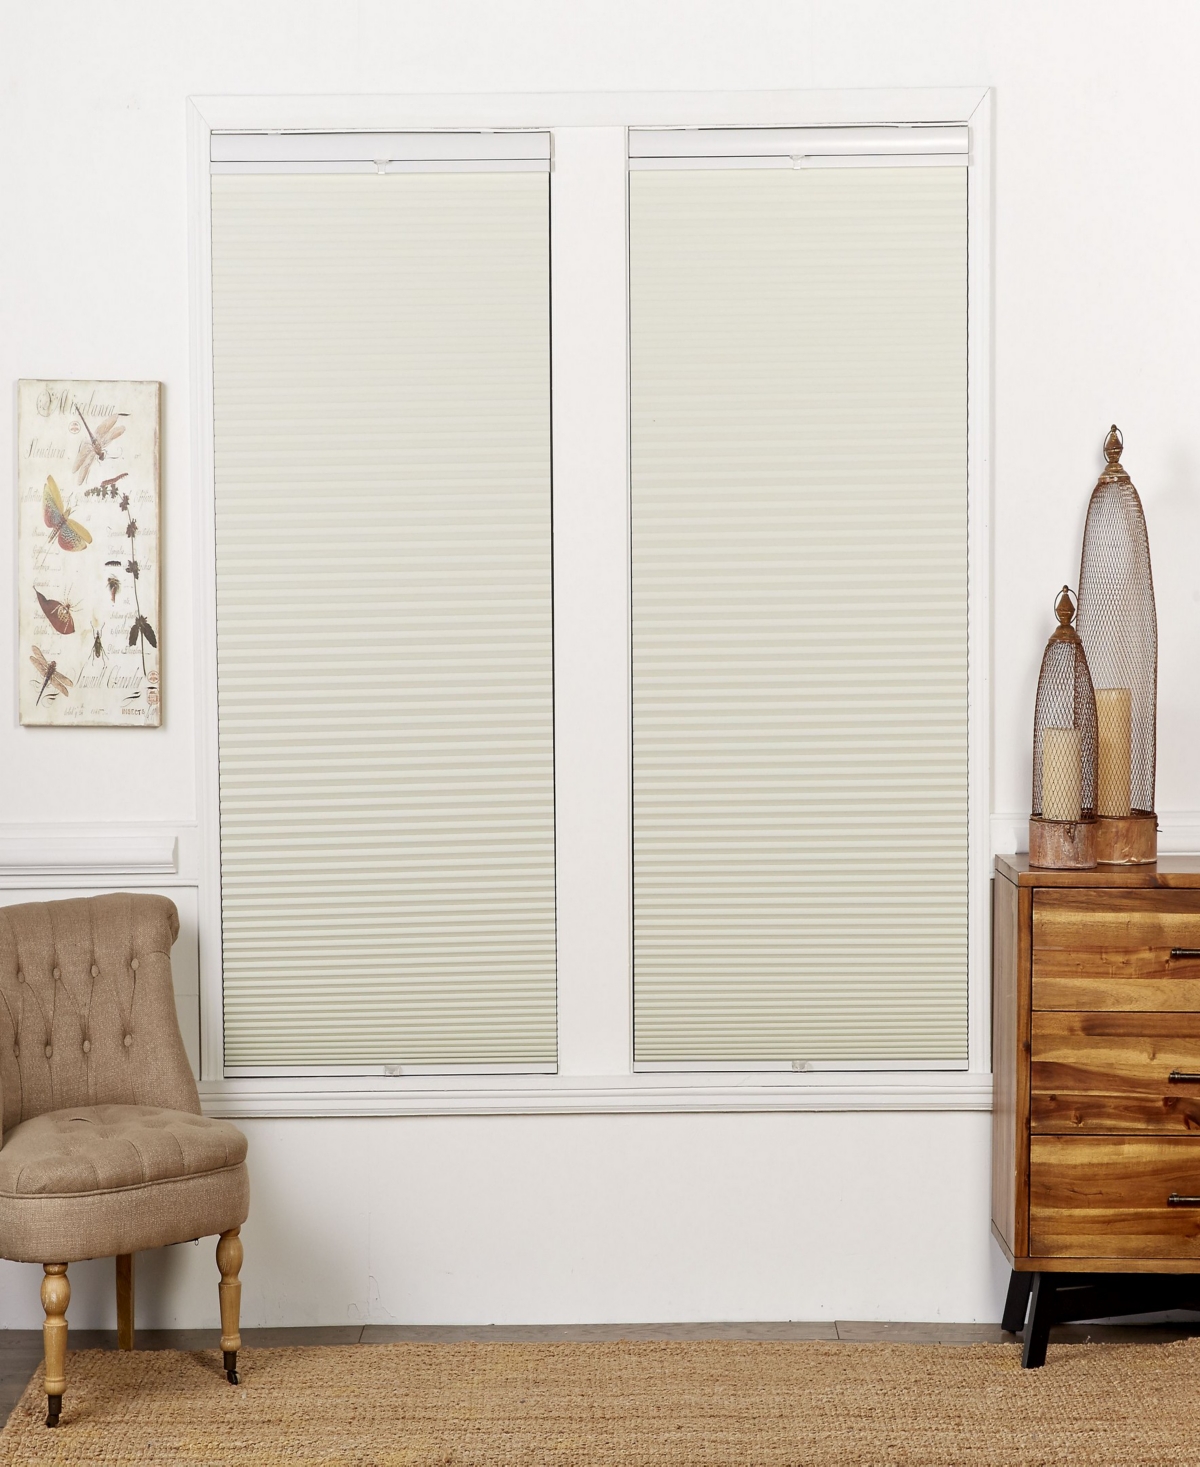 The Cordless Collection Cordless Blackout Cellular Shade, 32.5" X 48" In Latte-whit